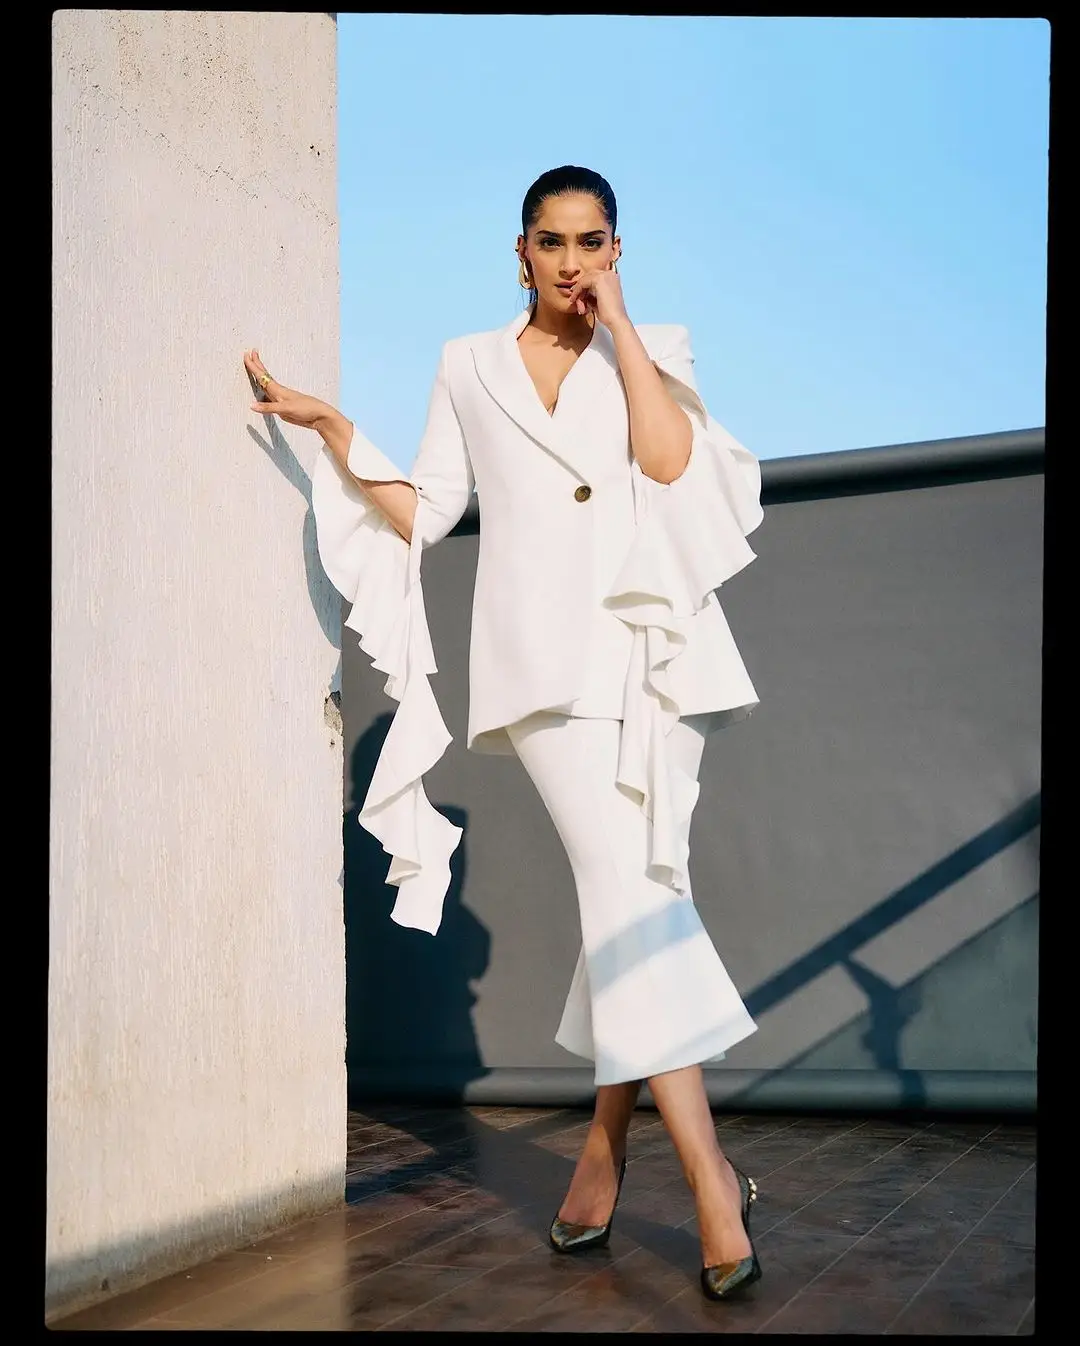 BOLLYWOOD ACTRESS SONAM KAPOOR PHOTOSHOOT IN LONG WHITE TOP PANT 4